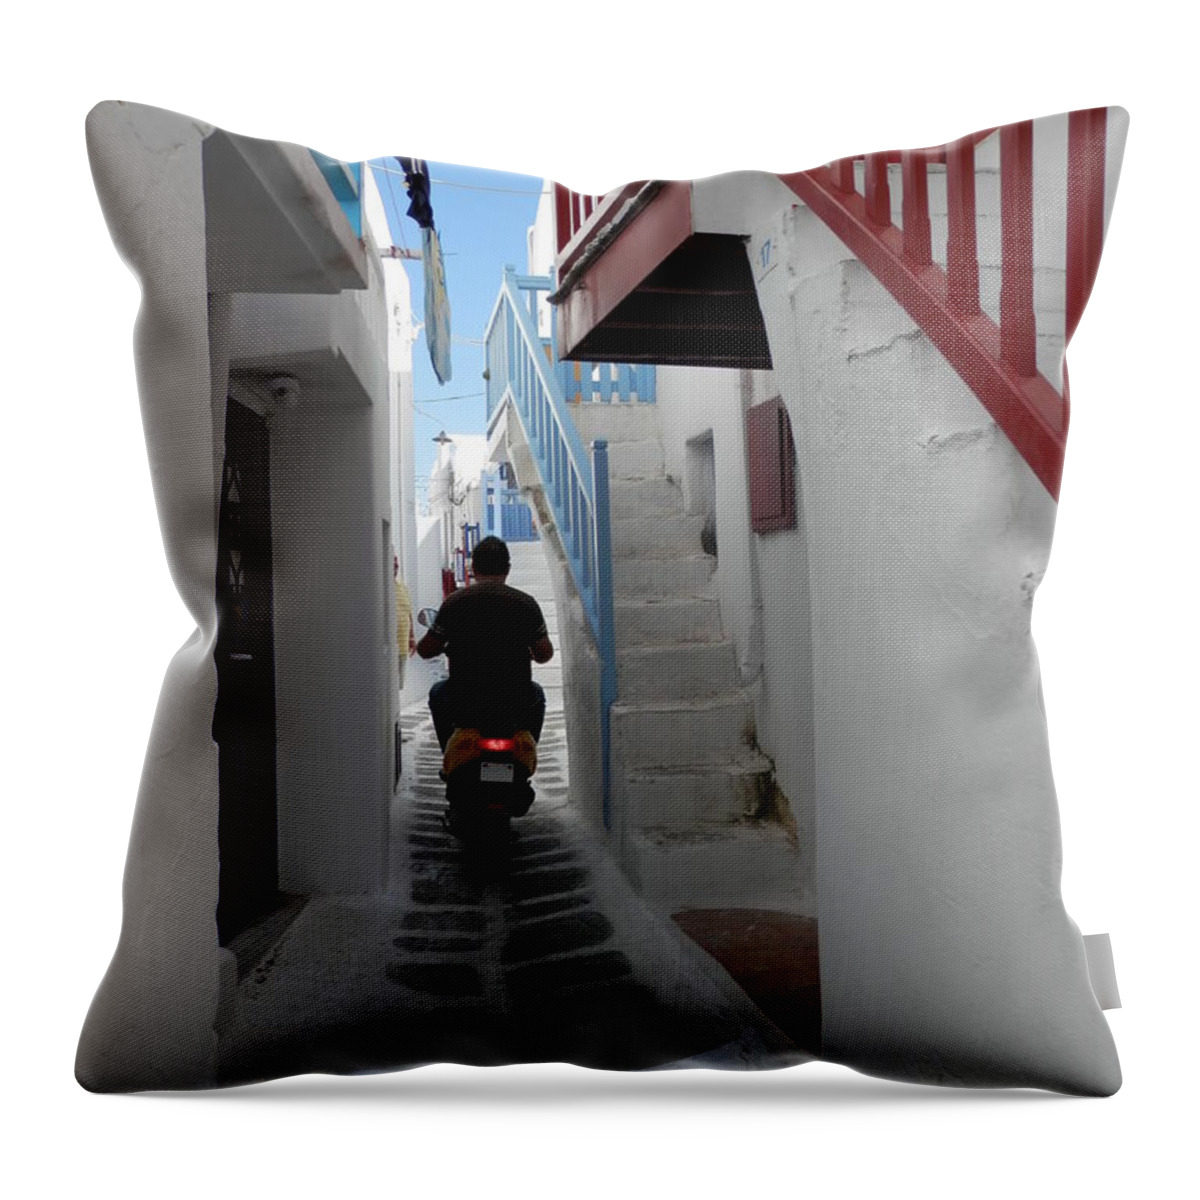 Alley Way Throw Pillow featuring the photograph Alley Way in Mykonos by Pema Hou